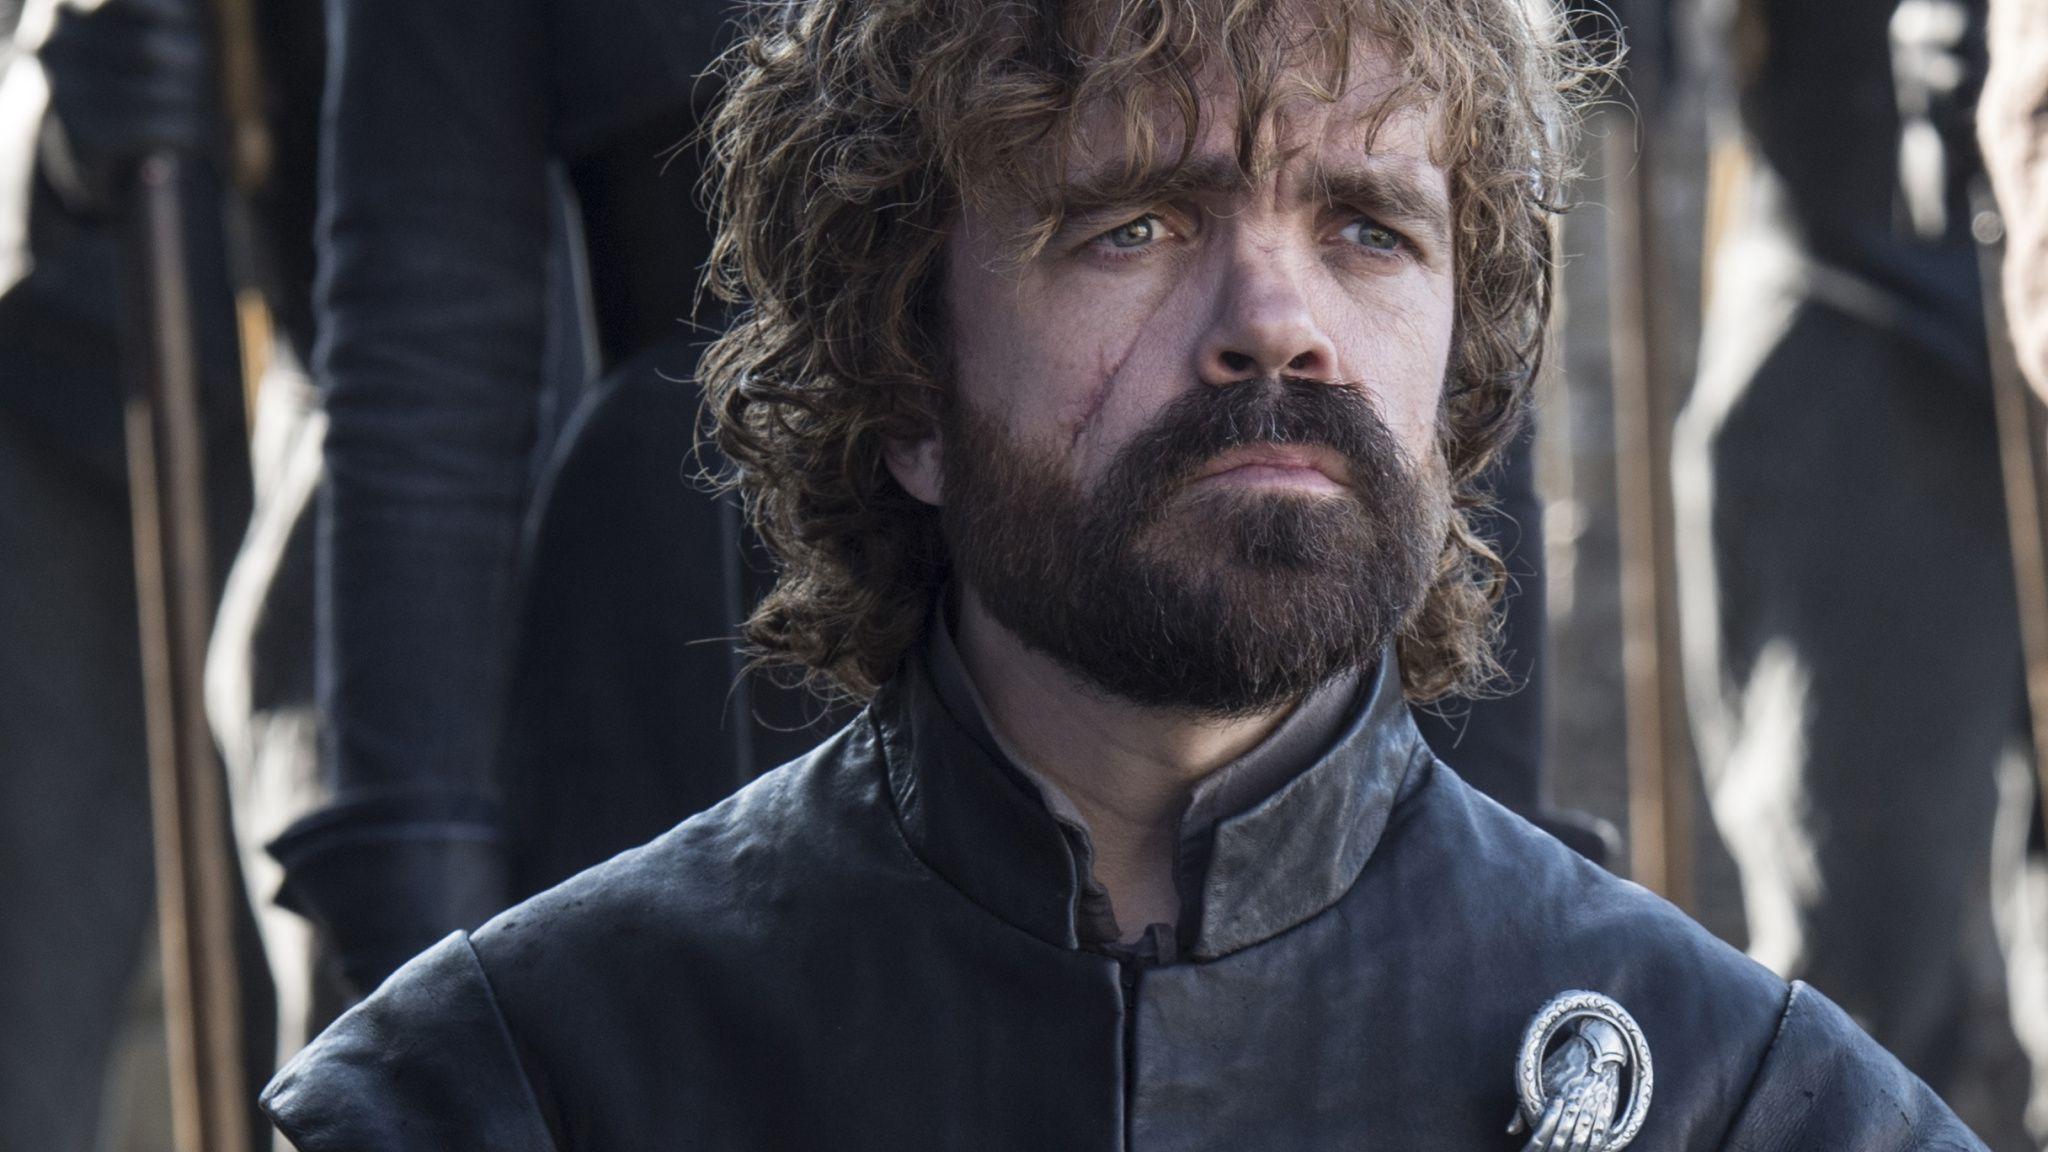 Download 2048x1152 Wallpaper Game Of Thrones, Peter Dinklage, Tyrion